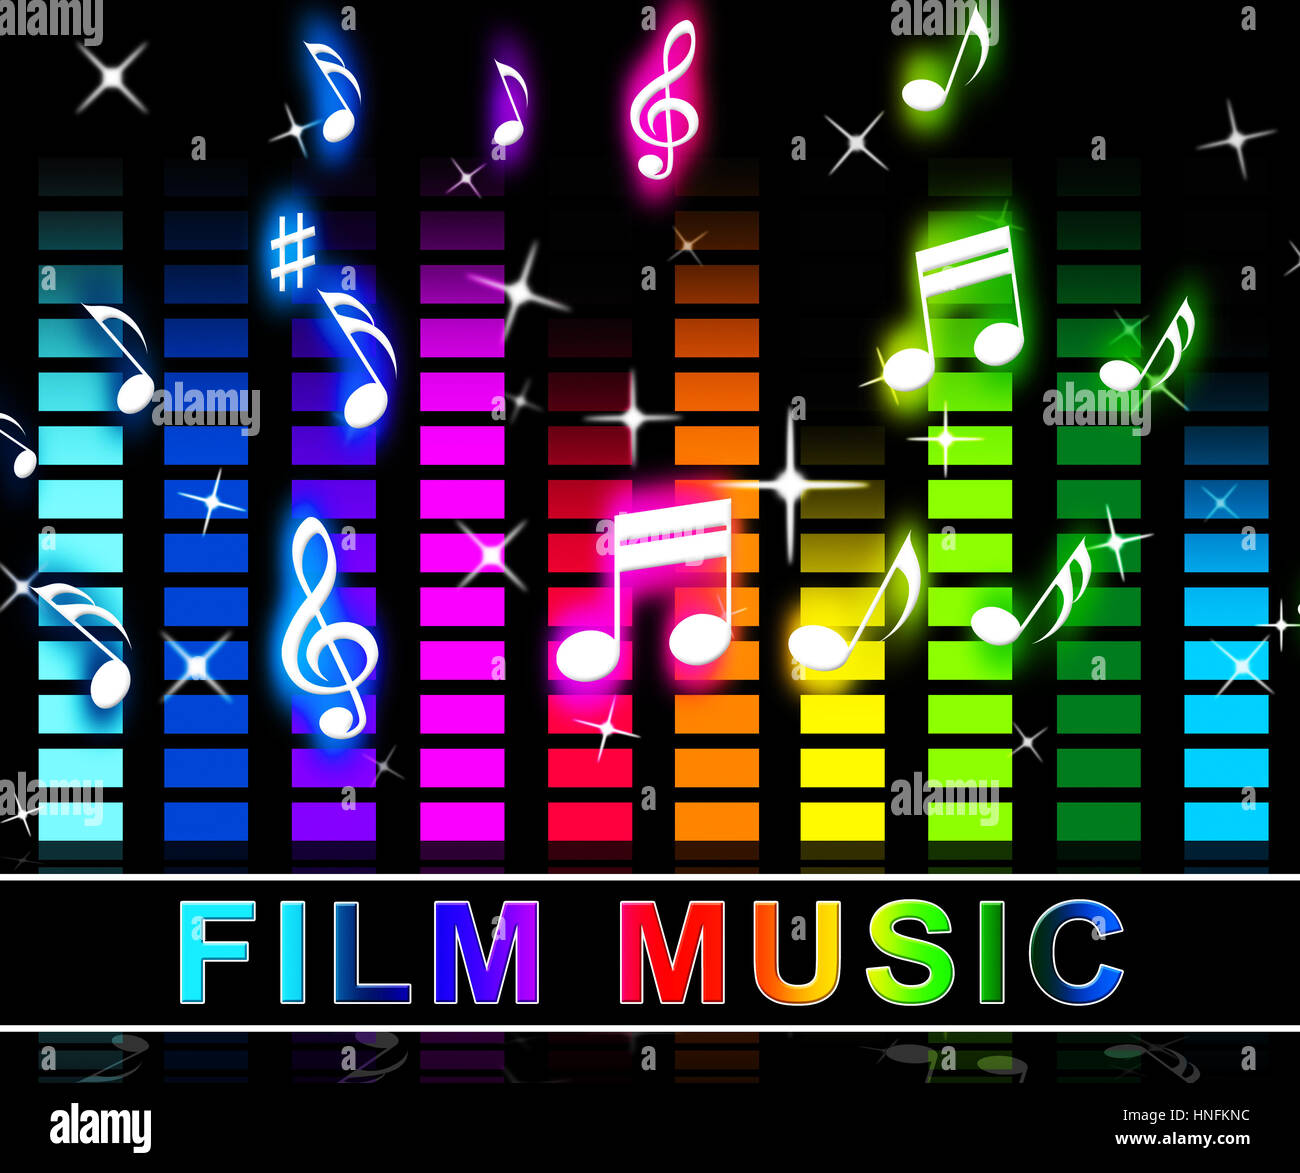 Film Music Equalizer Notes Means Songs From Movies Soundtracks Stock Photo